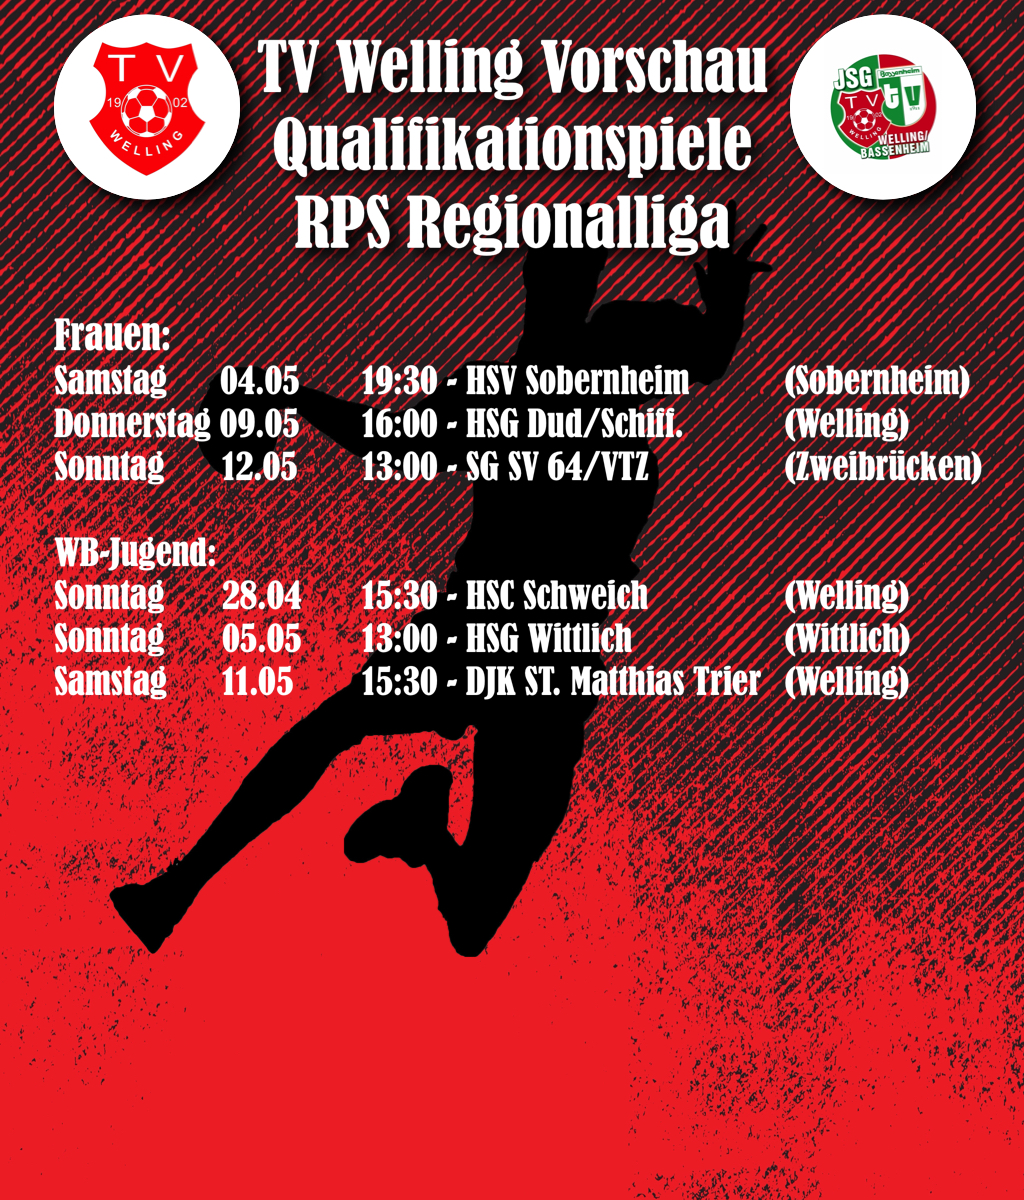 You are currently viewing Qualifikationspiele zur RPS Regionalliga